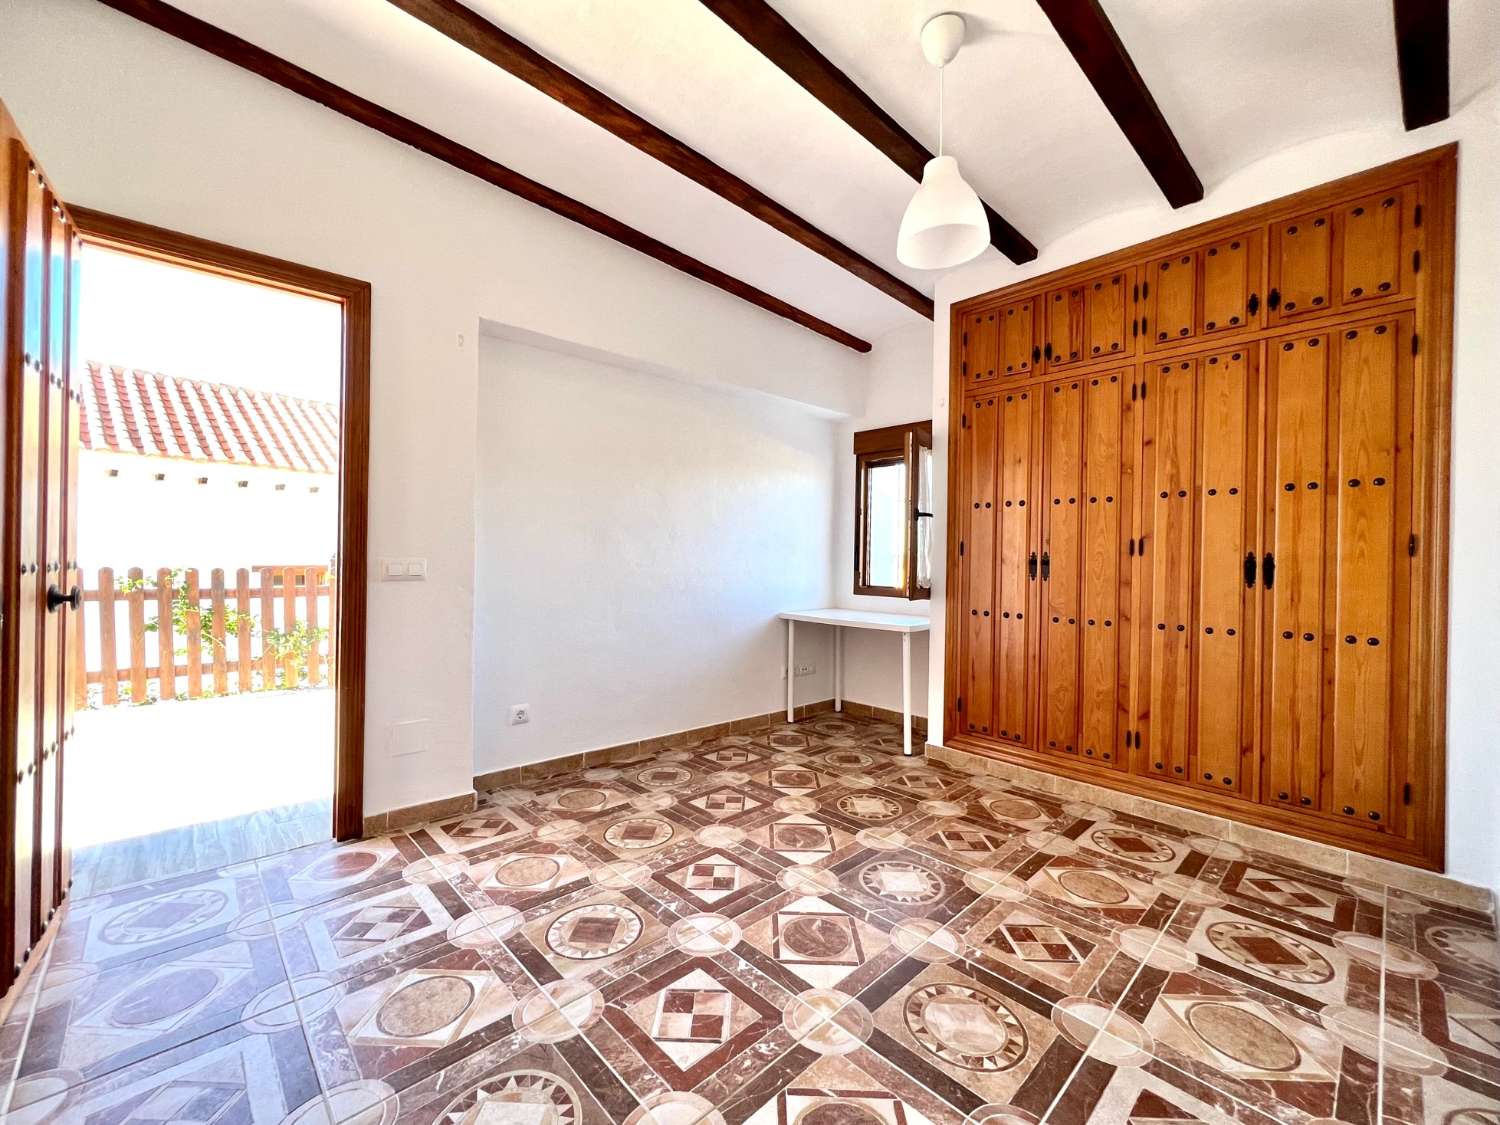 Country House with private pool in Frigiliana